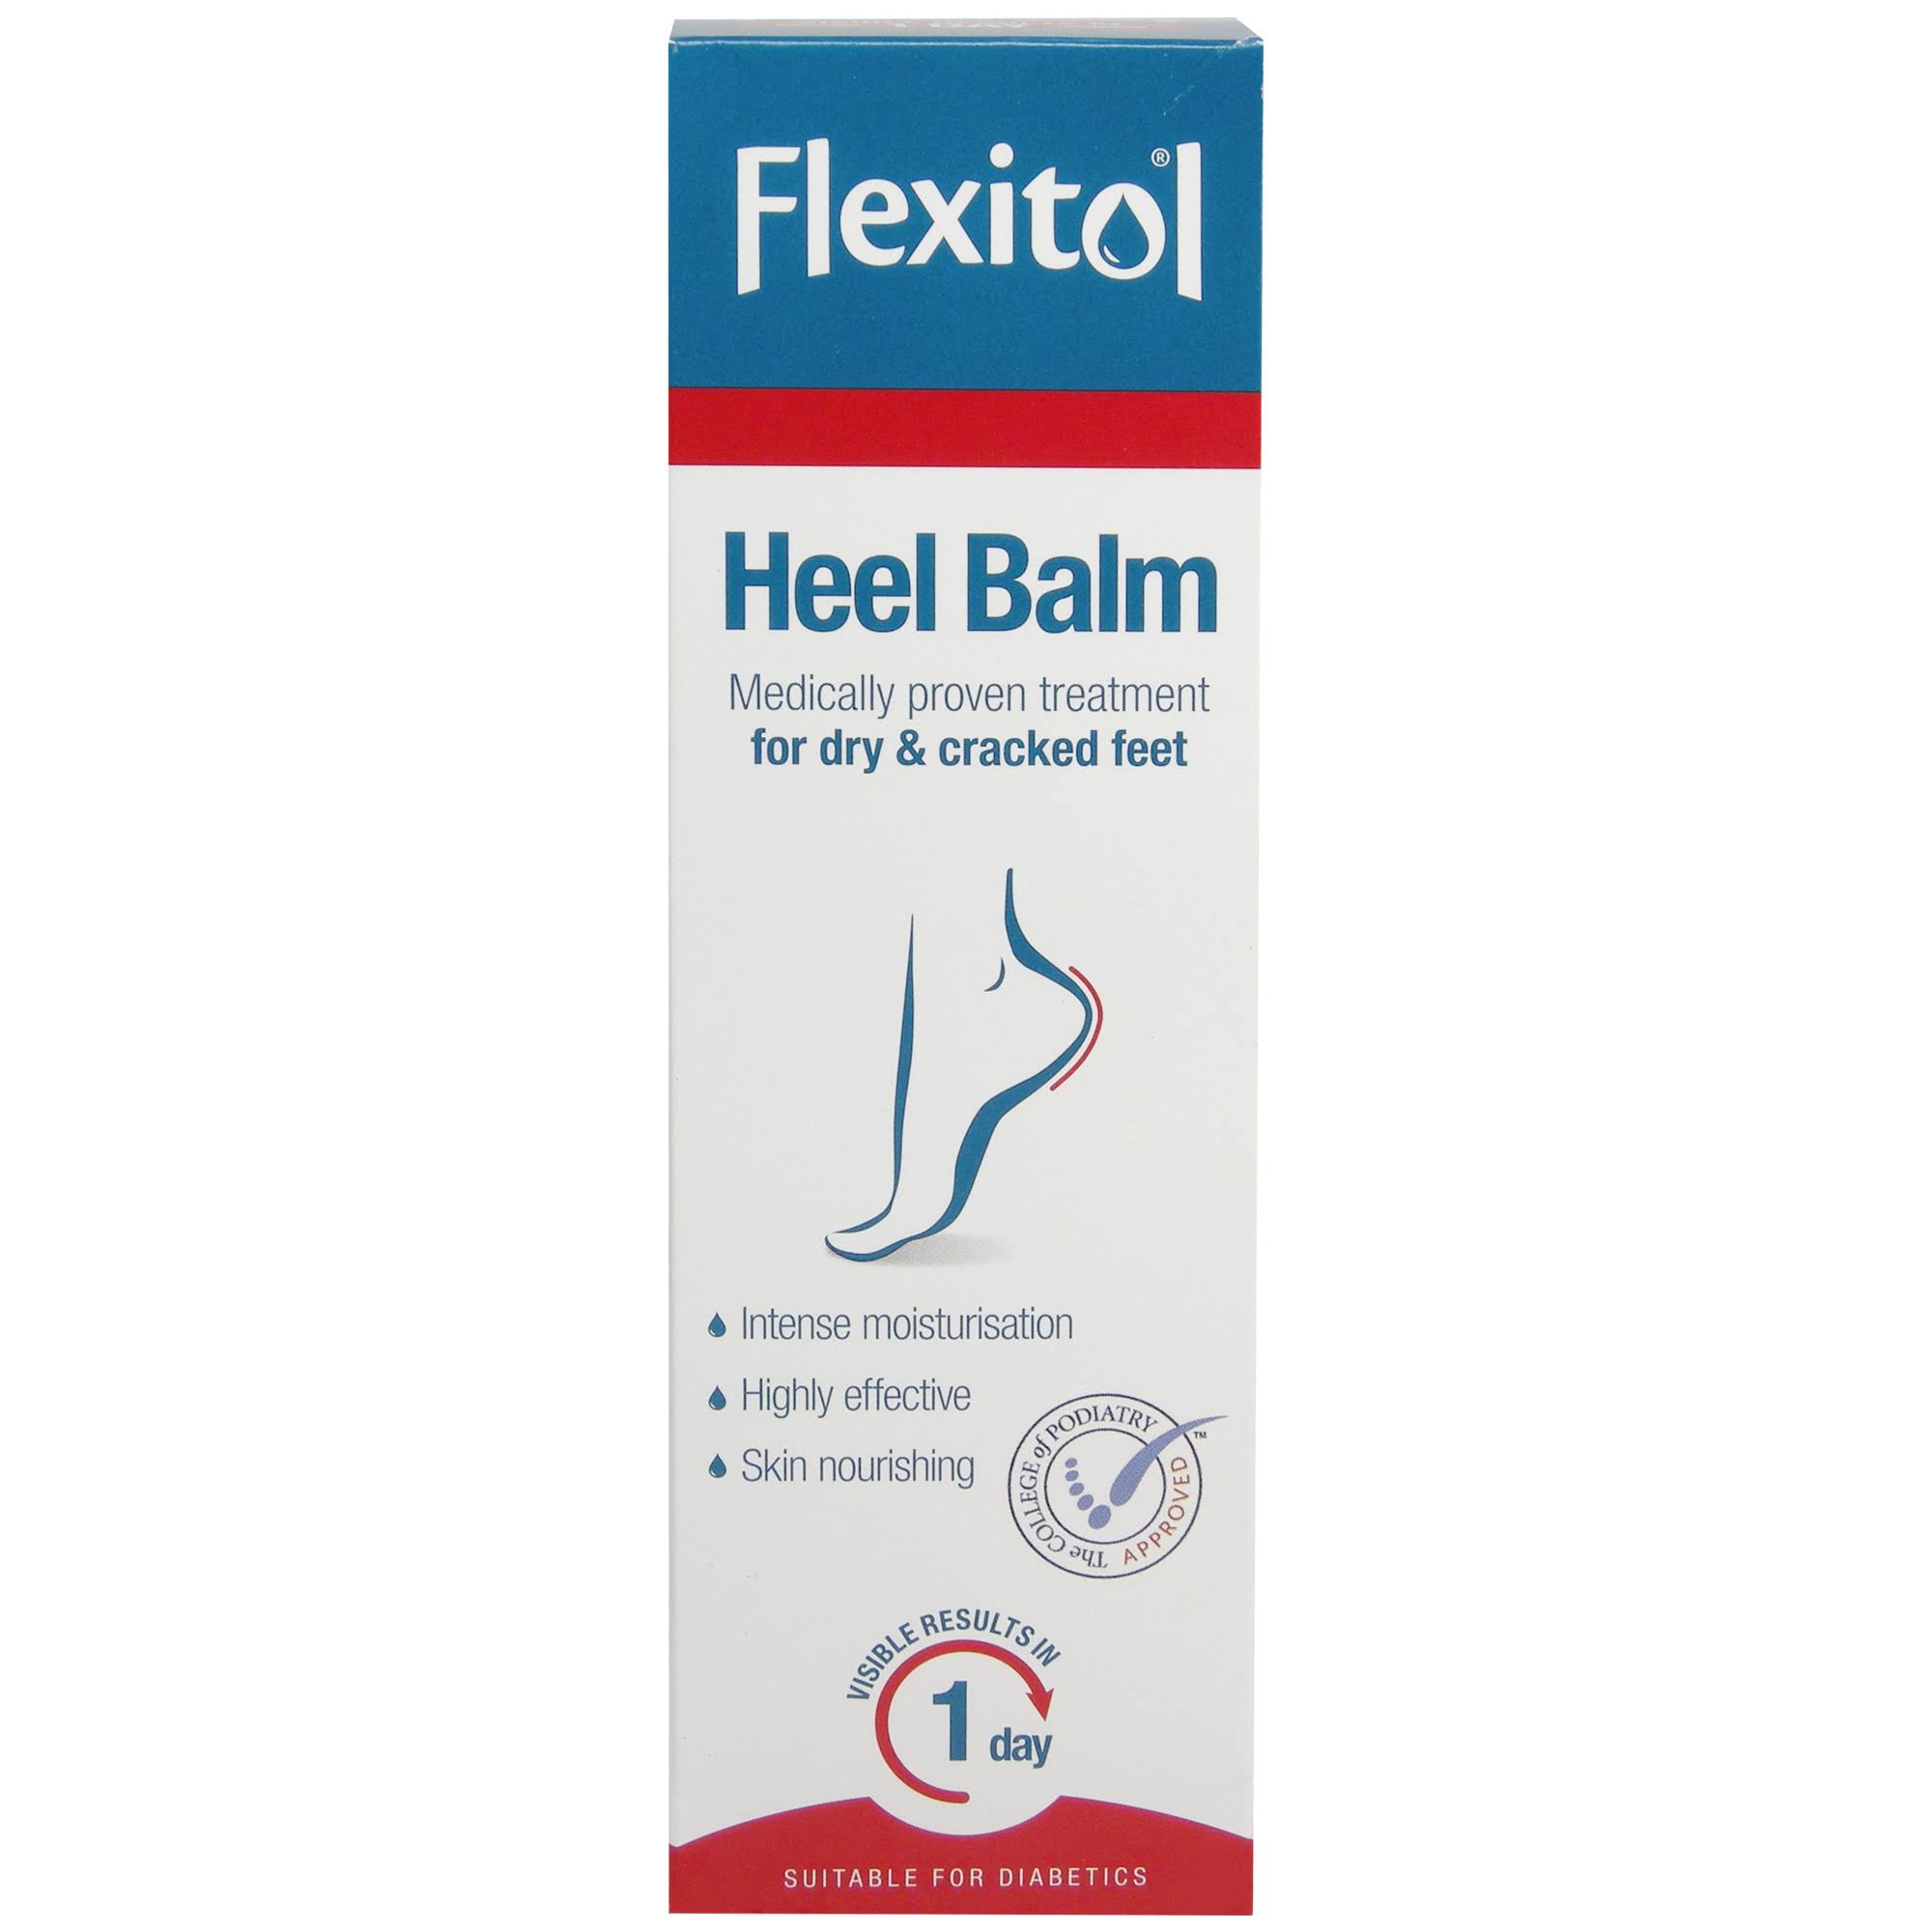 Flexitol Heel Balm Medically Proven Treatment - For Dry and Cracked Heels, 112g